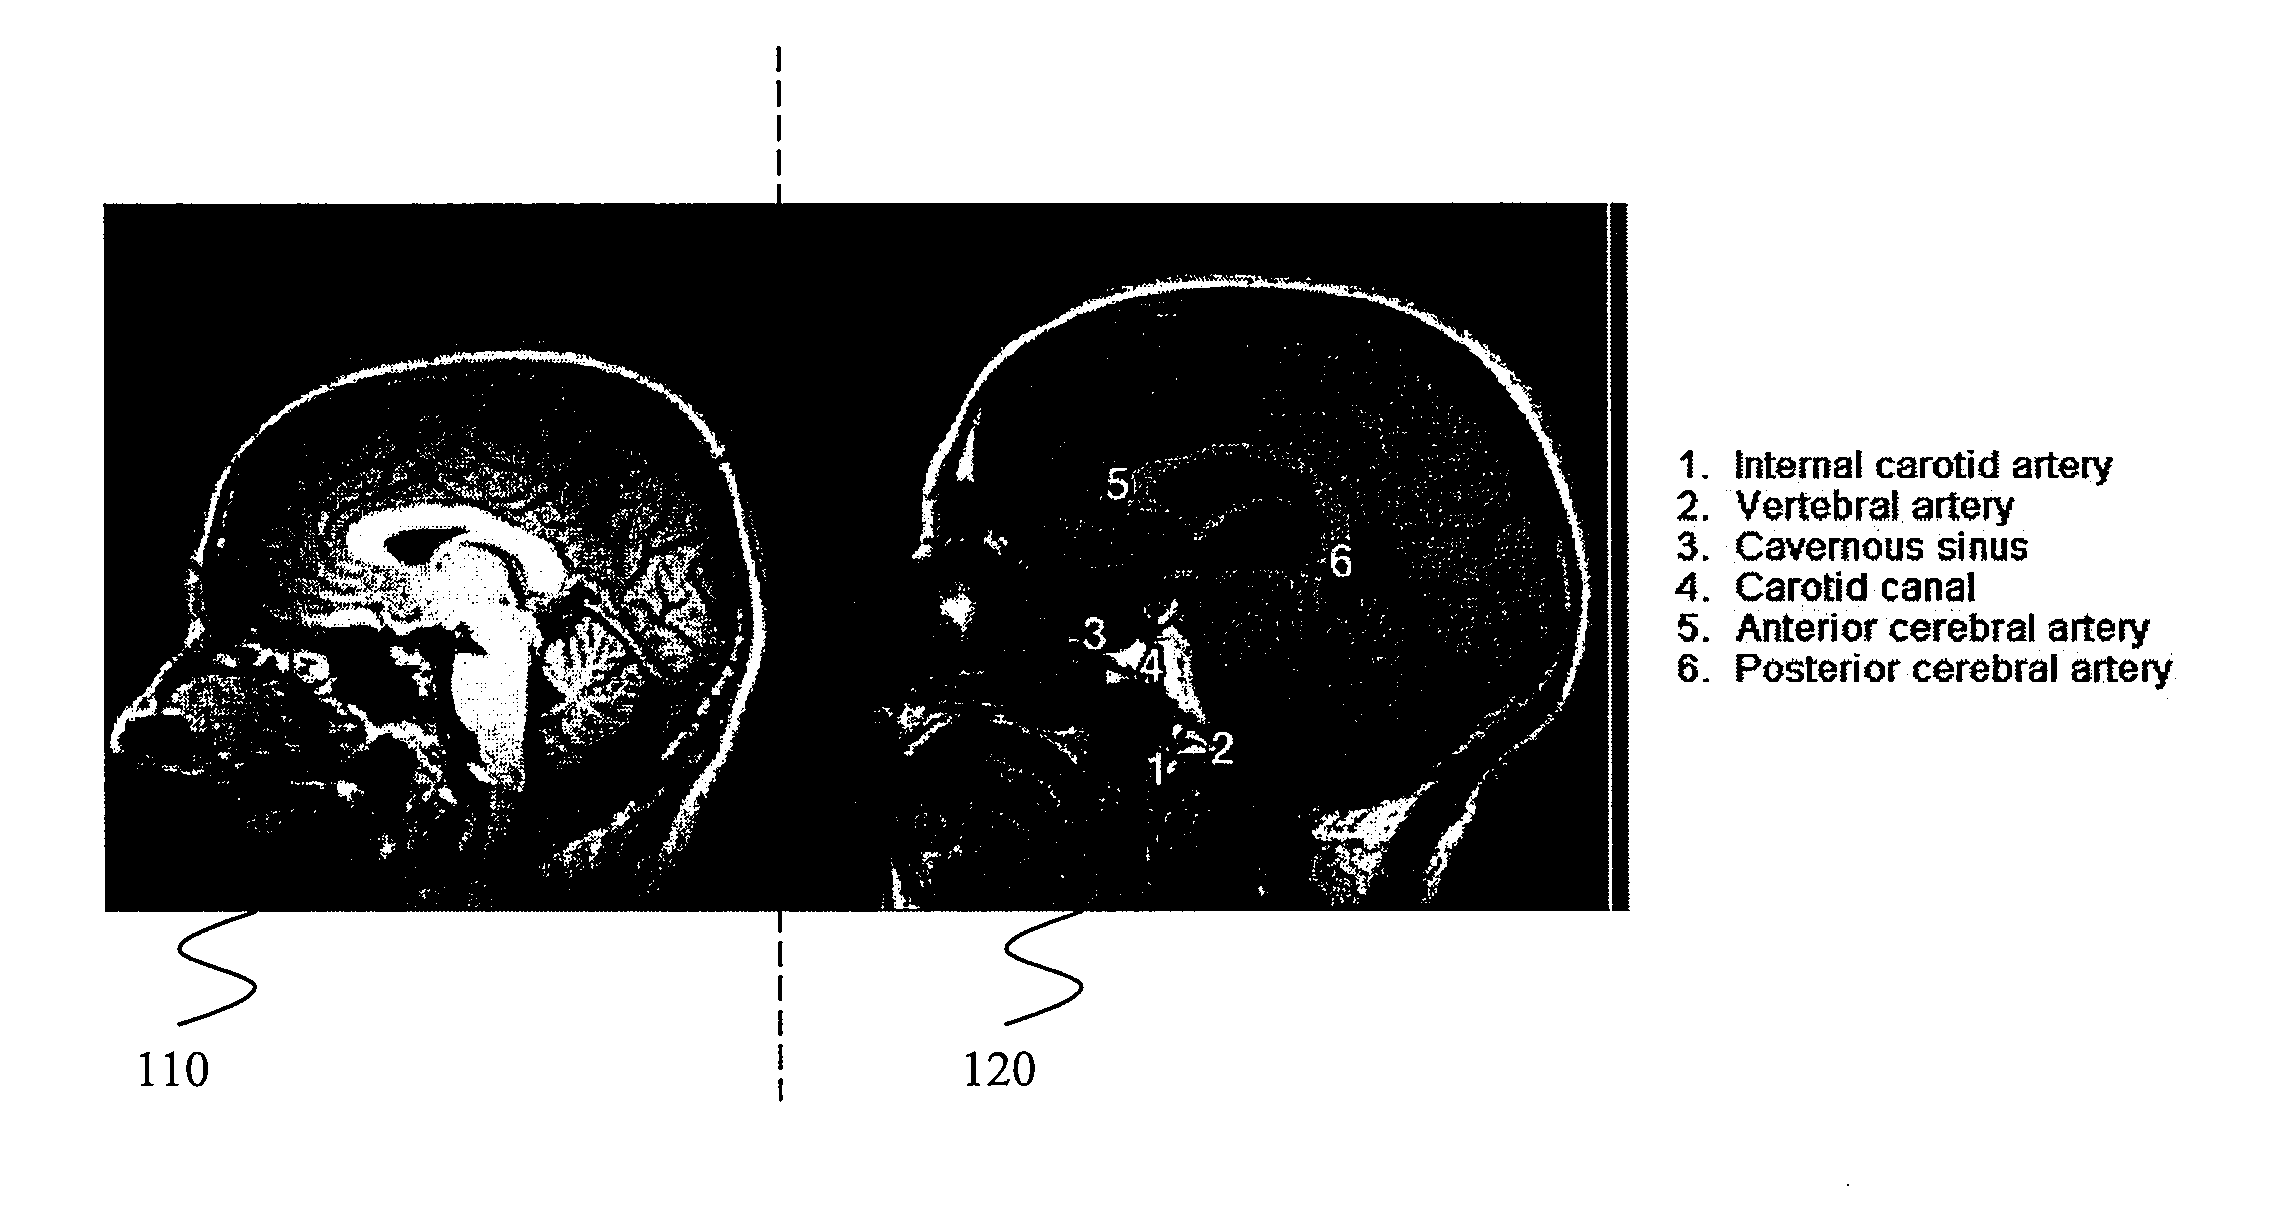 Systems and methods for synchronized image viewing with an image atlas